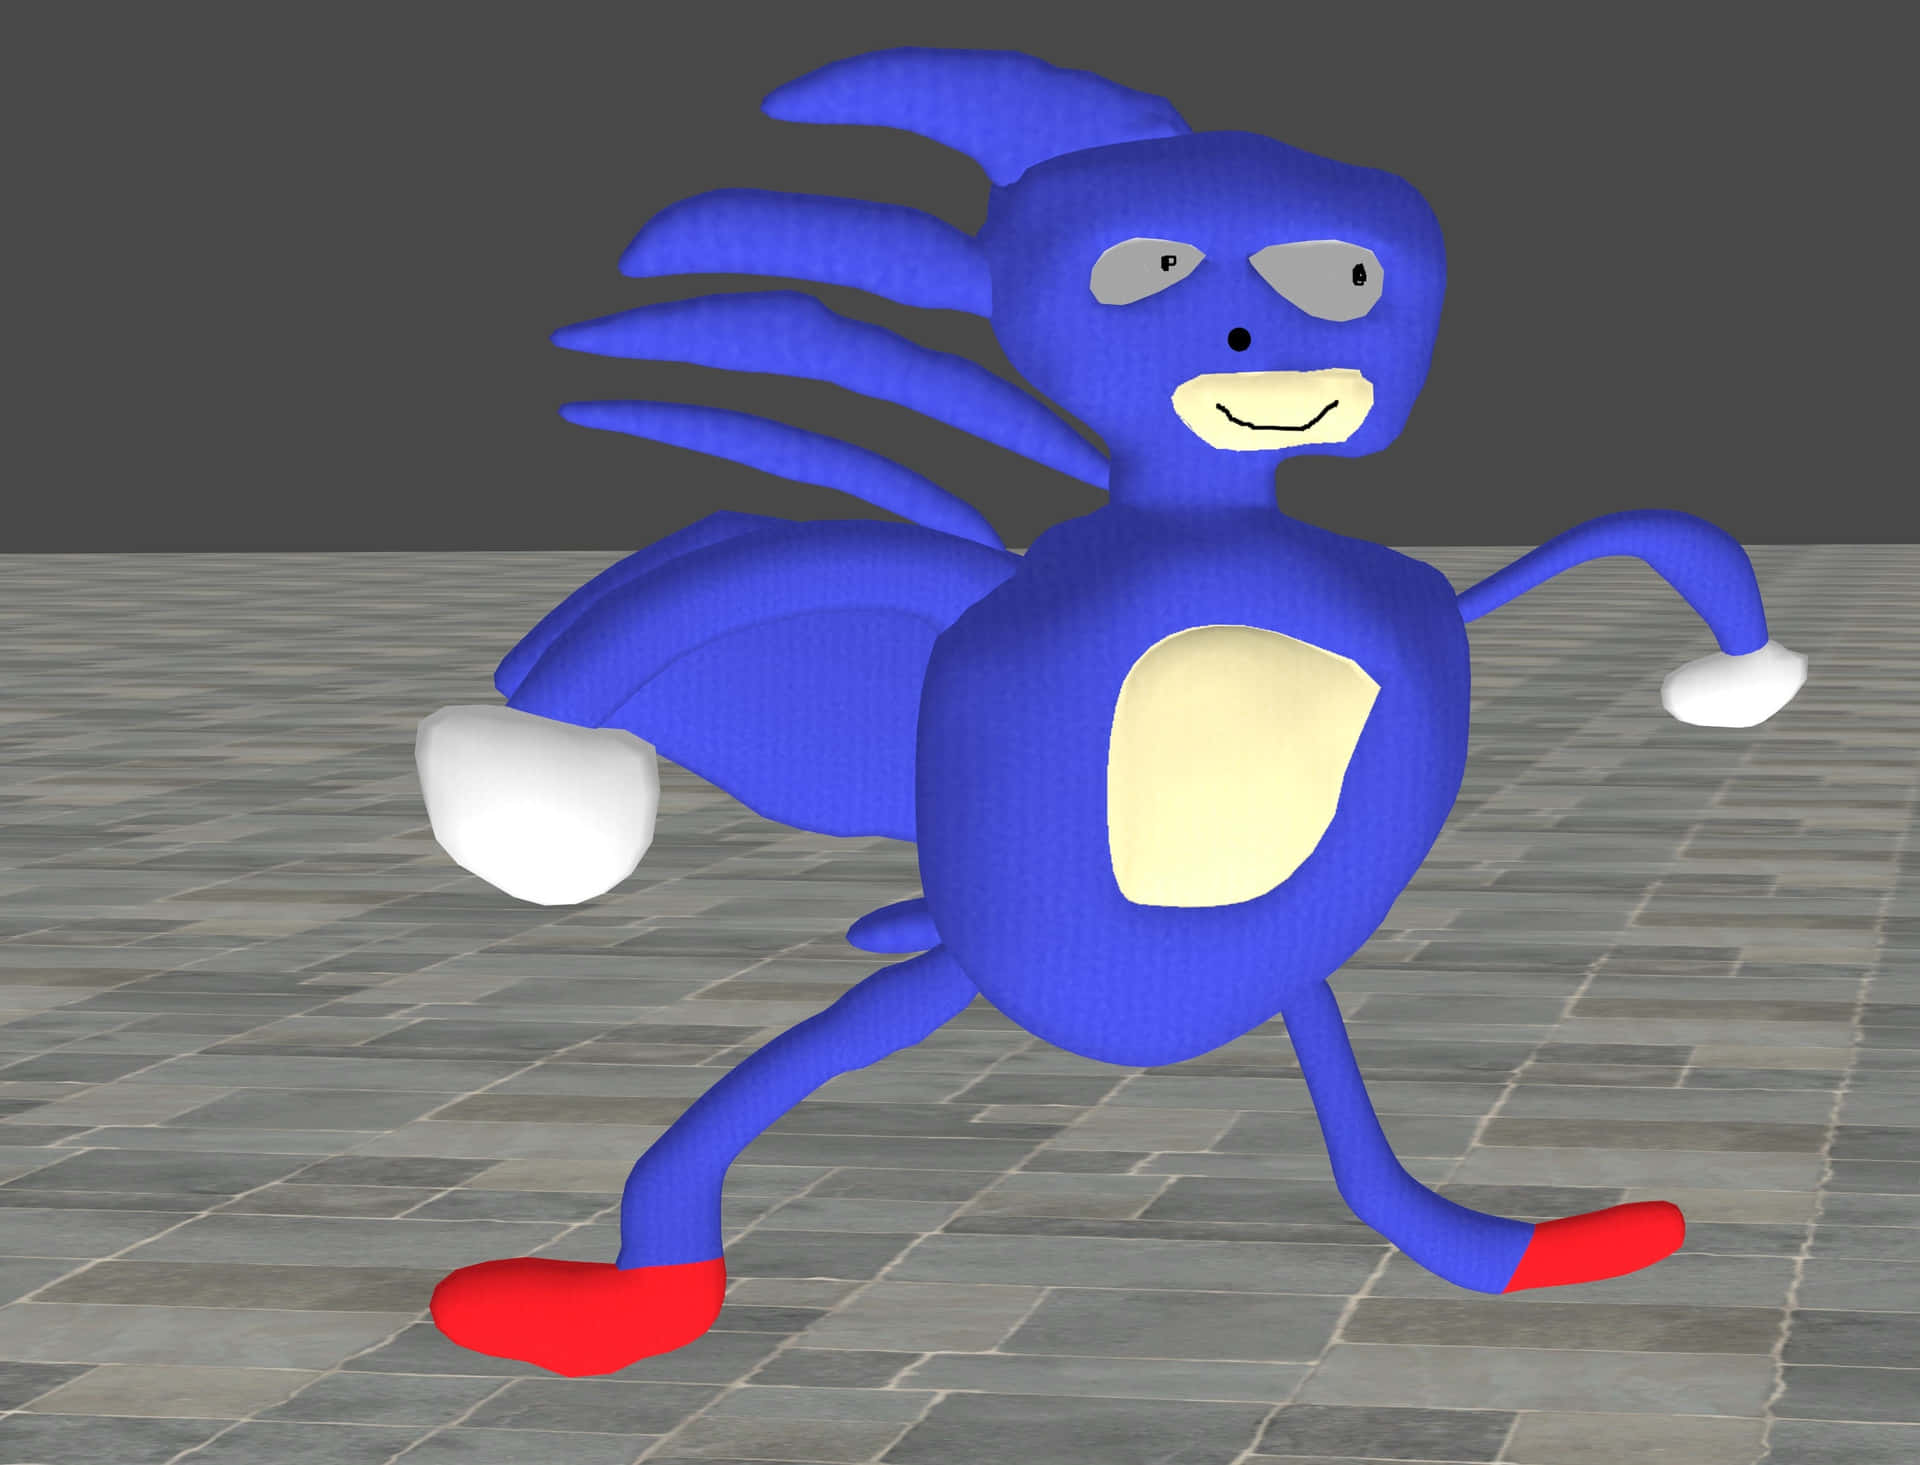 Sanic, The Fun Reinterpretation Of The Classic Game Character Sonic The Hedgehog Background